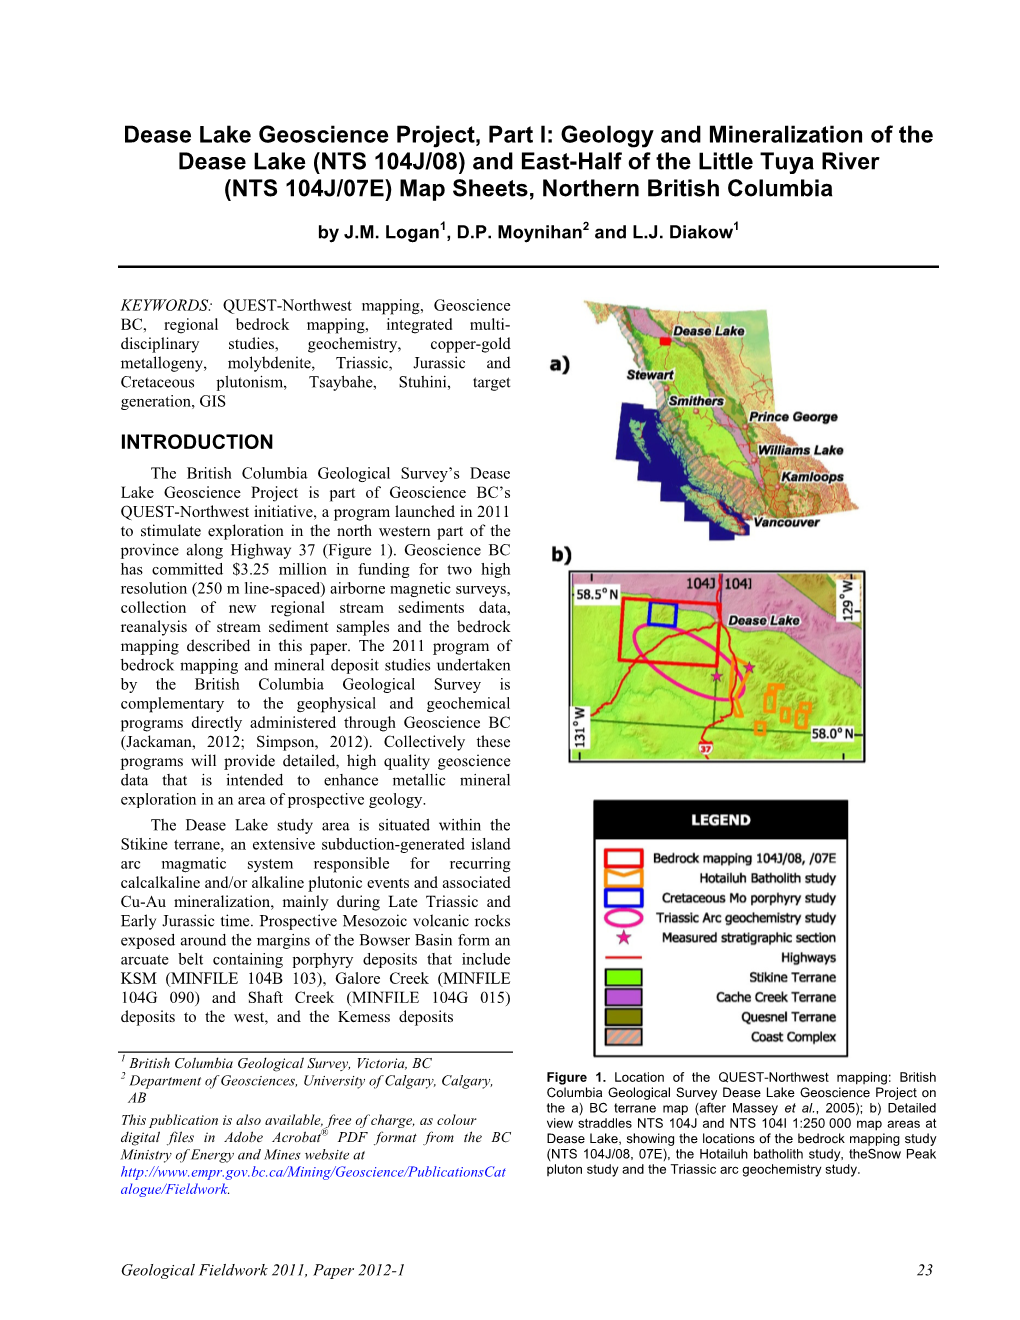 Geology and Mineralization of the Dease Lake (NTS 104J/08) and East-Half of the Little Tuya River (NTS 104J/07E) Map Sheets, Northern British Columbia